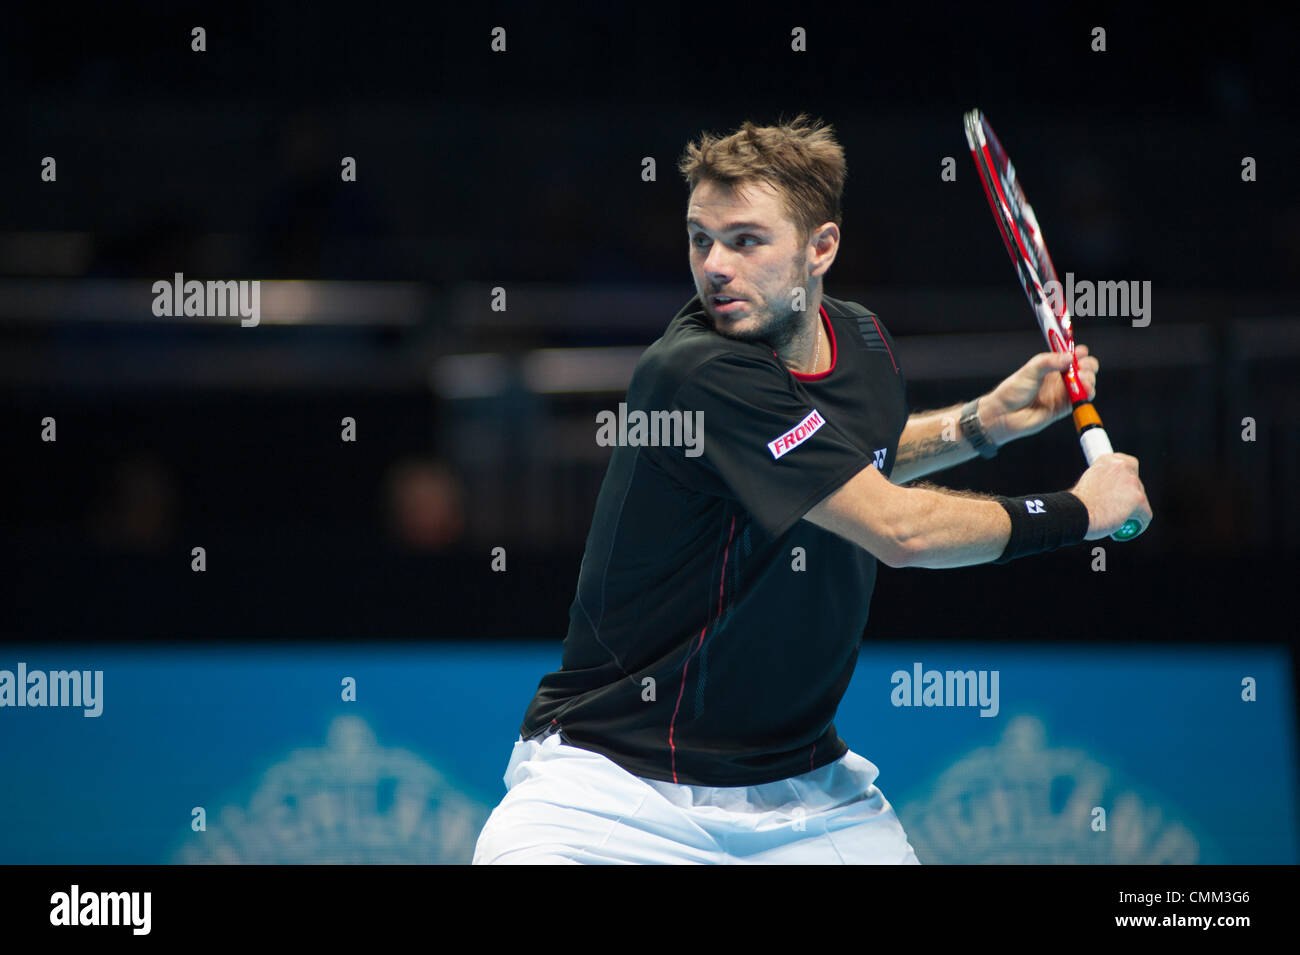 London, UK. 4th Nov, 2013. Group A Singles Competition, Stanislas Wawrinka (SUI) during the match with Tomas Berdych (CZE) at the Barclays ATP World Tour Finals Credit:  Malcolm Park editorial/Alamy Live News Stock Photo